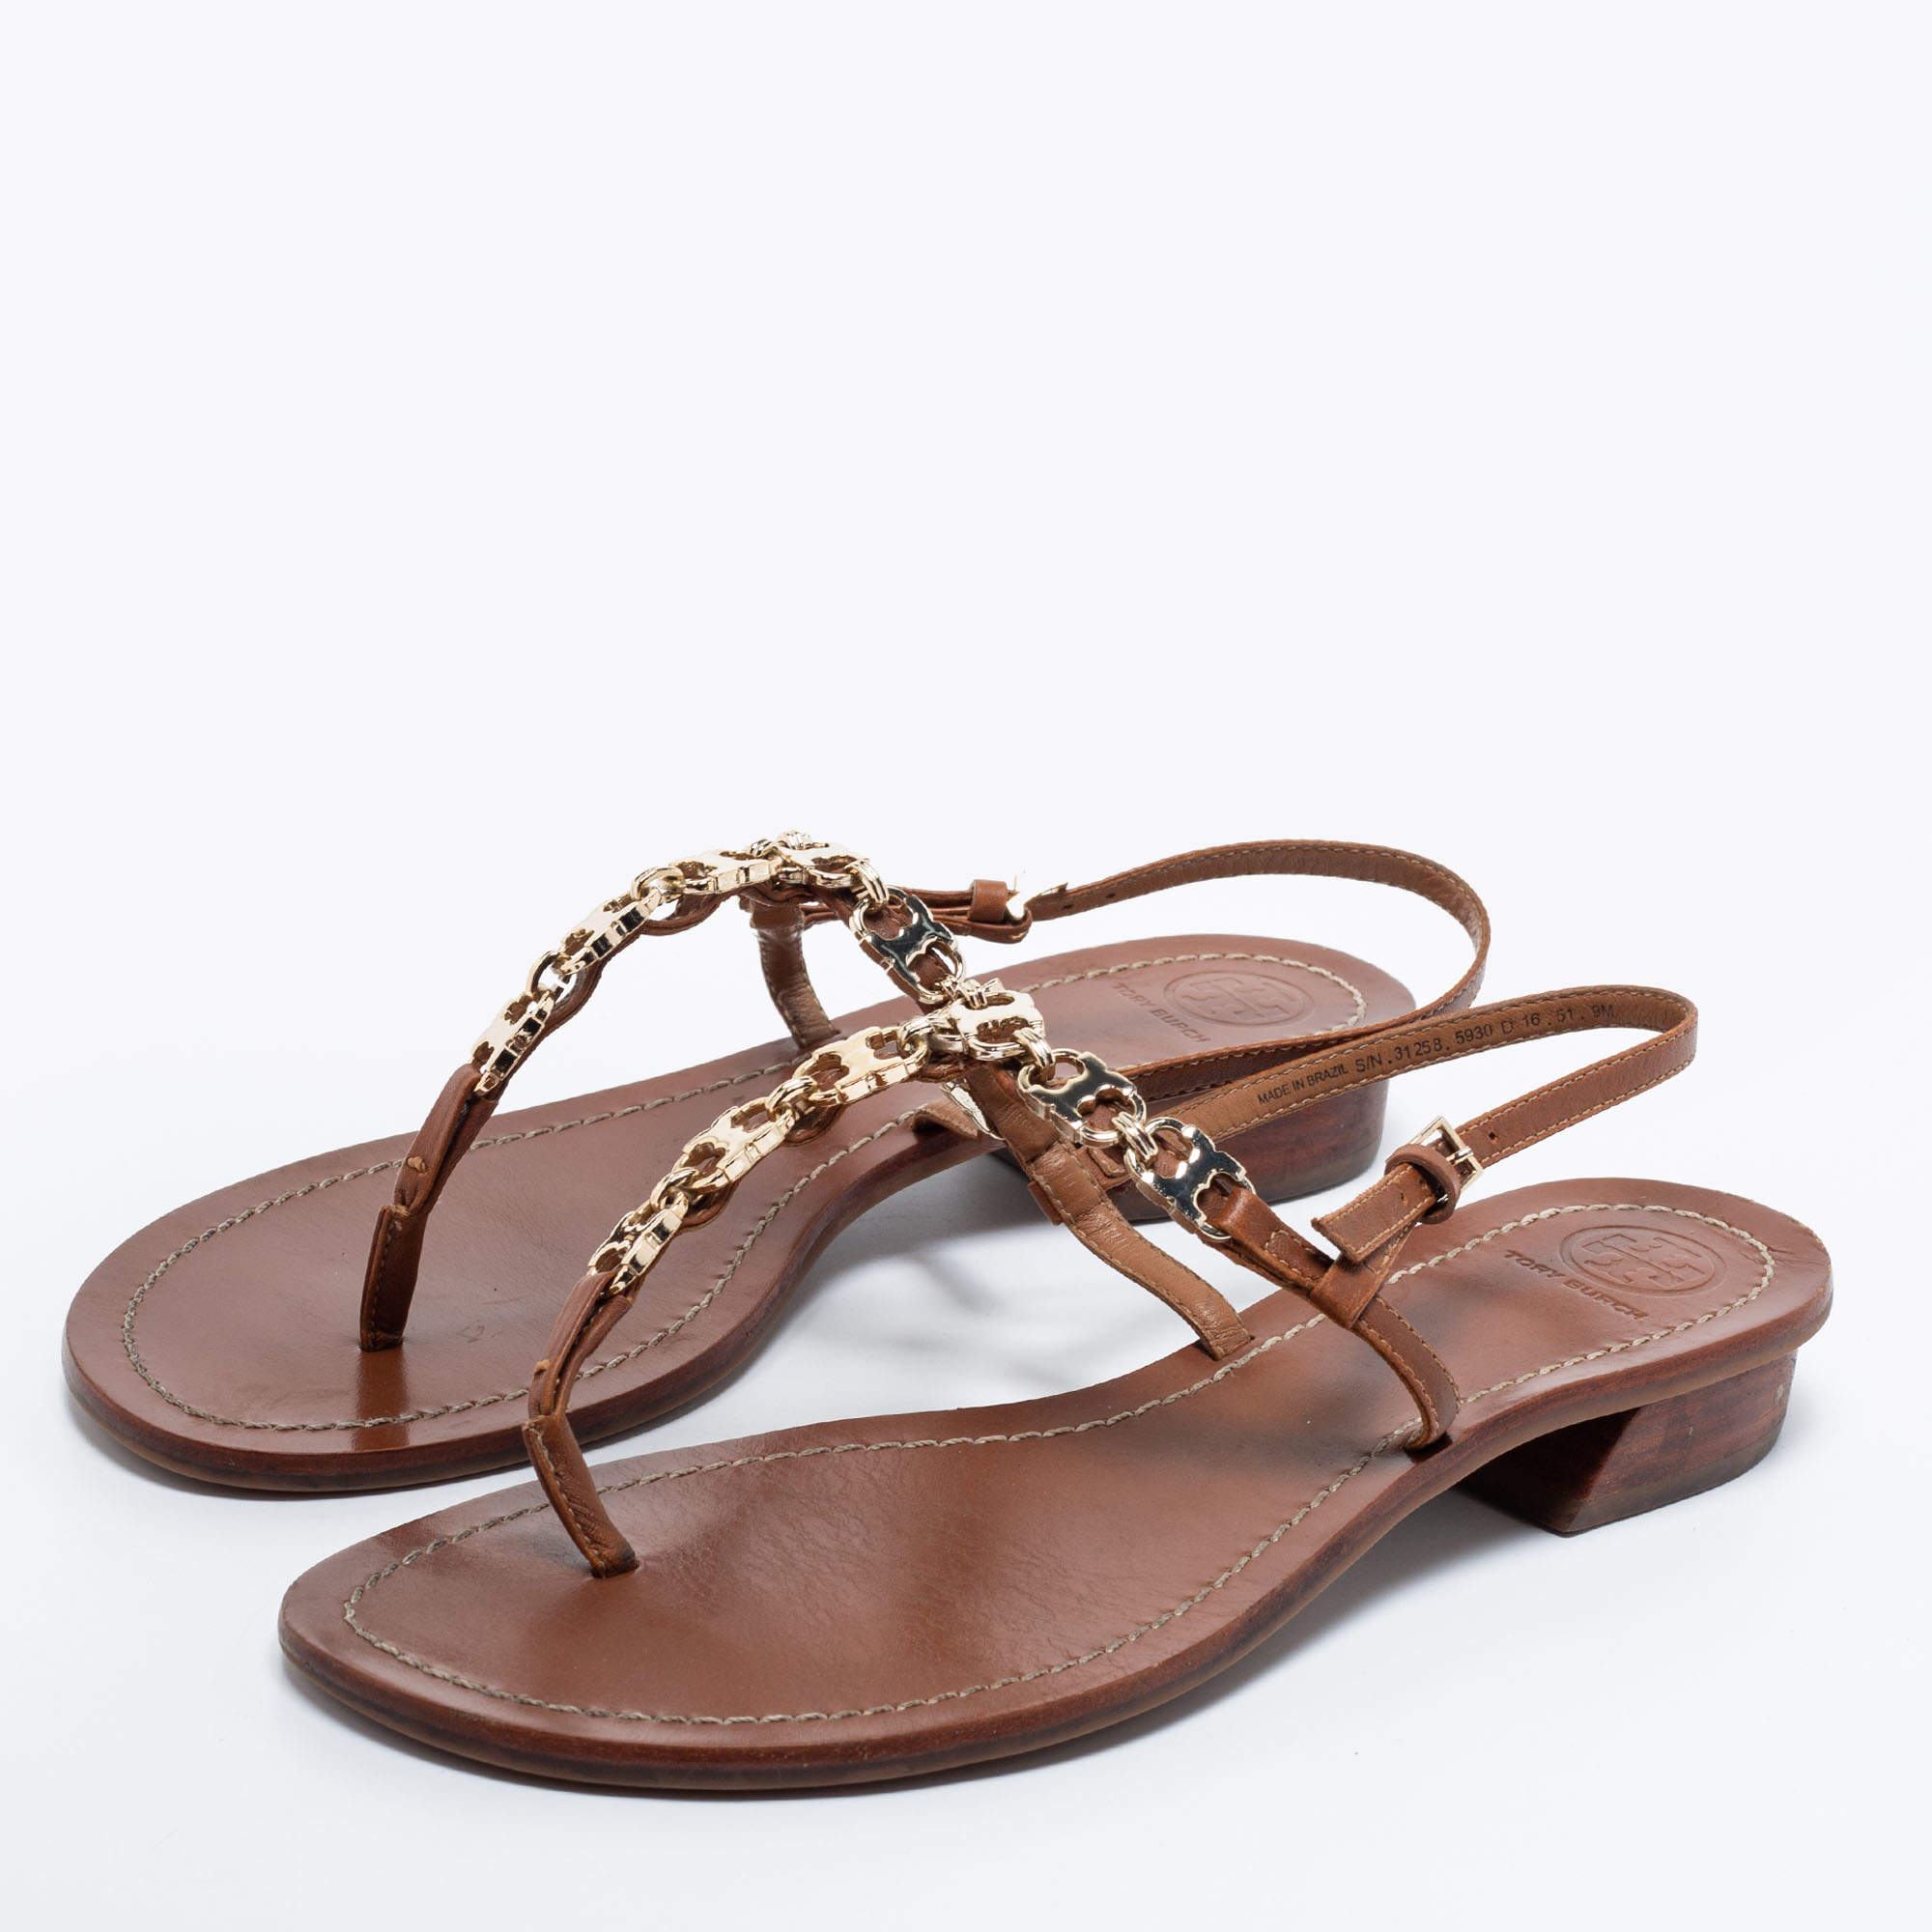 Tory Burch Brown Leather T Strap Flat Sandals Size 39 Tory Burch | TLC